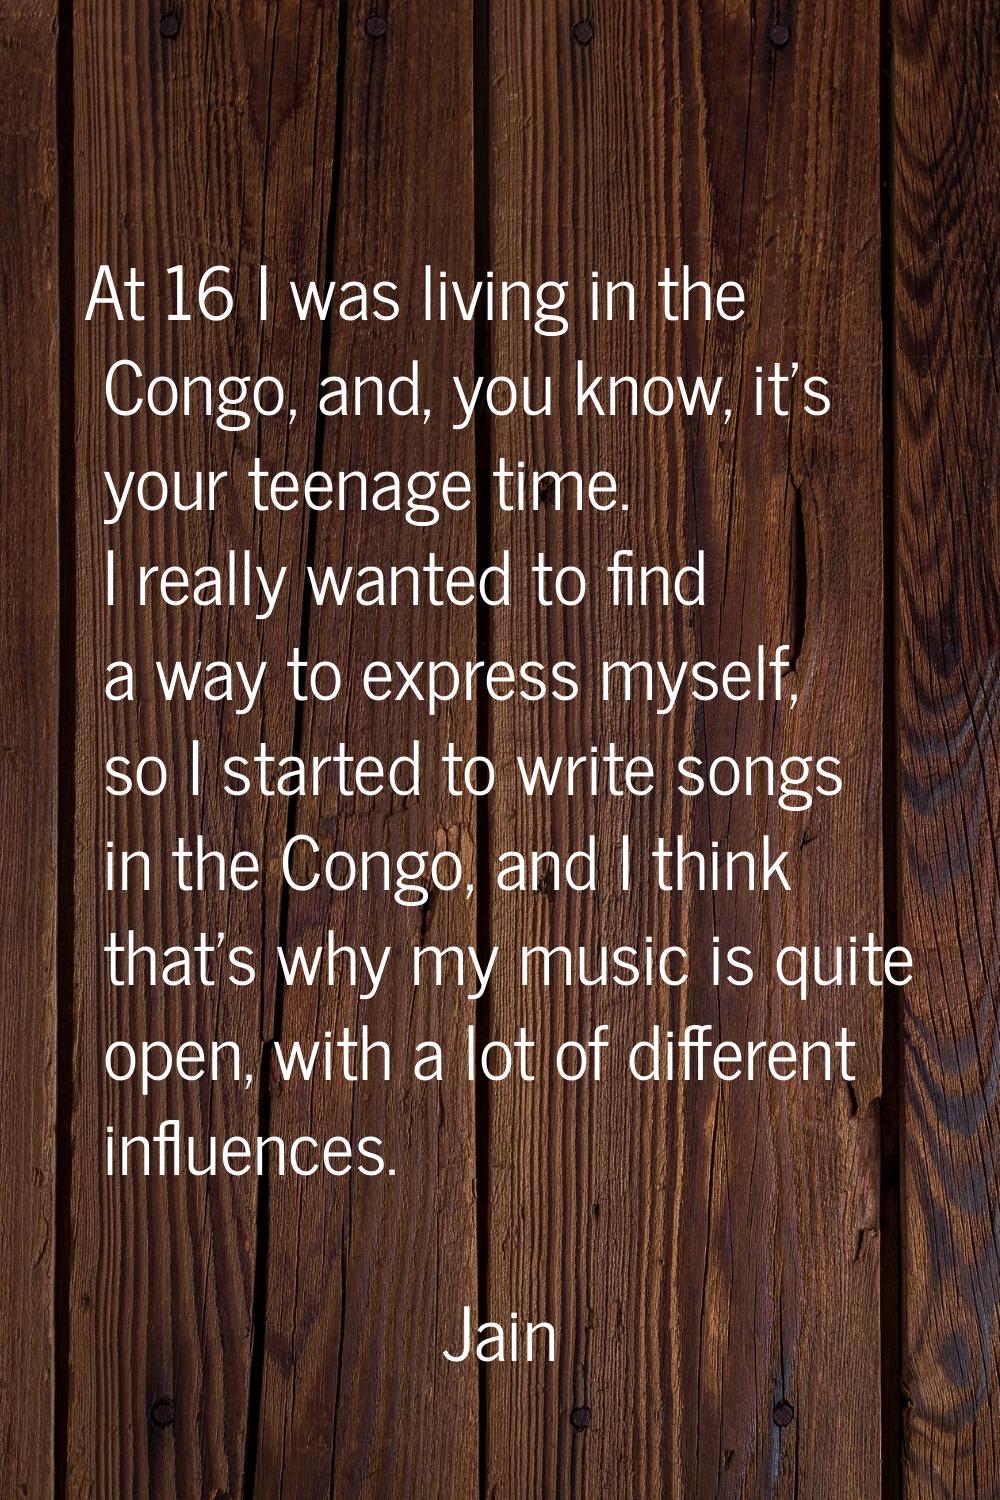 At 16 I was living in the Congo, and, you know, it's your teenage time. I really wanted to find a w